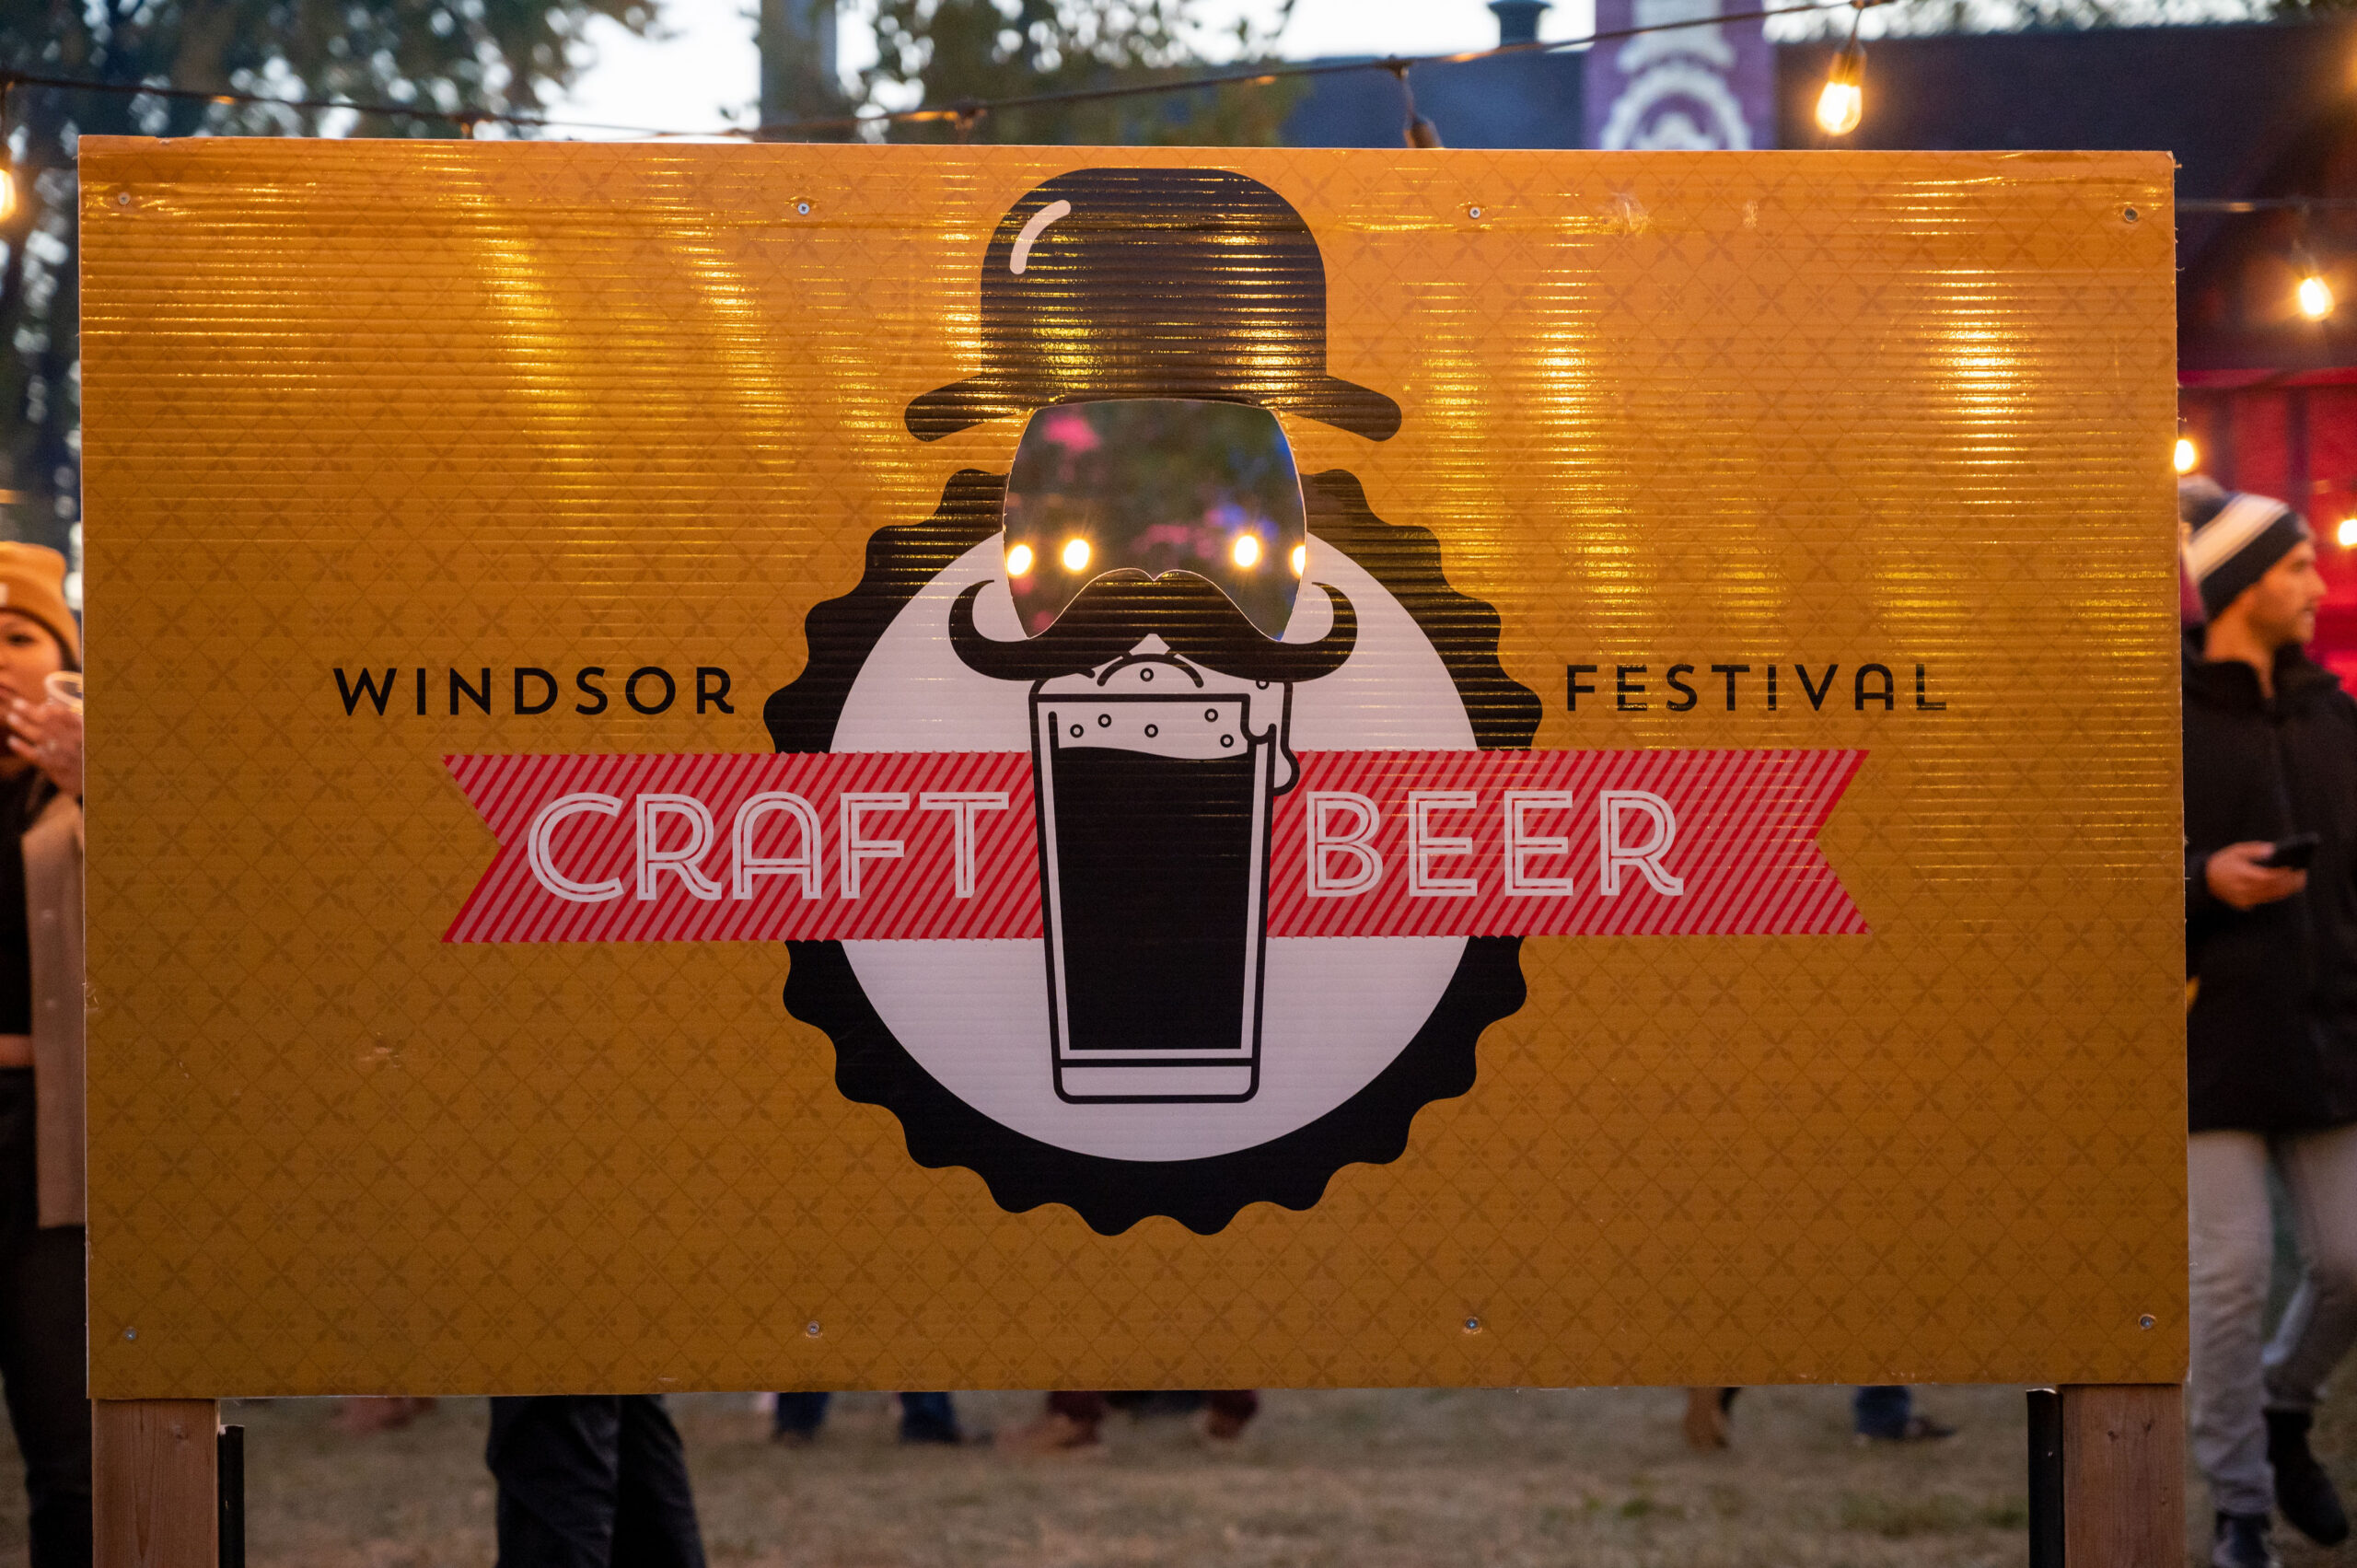 The Windsor Craft Beer Festival takes place in the historic Willistead Park in Windsor, Ontario.